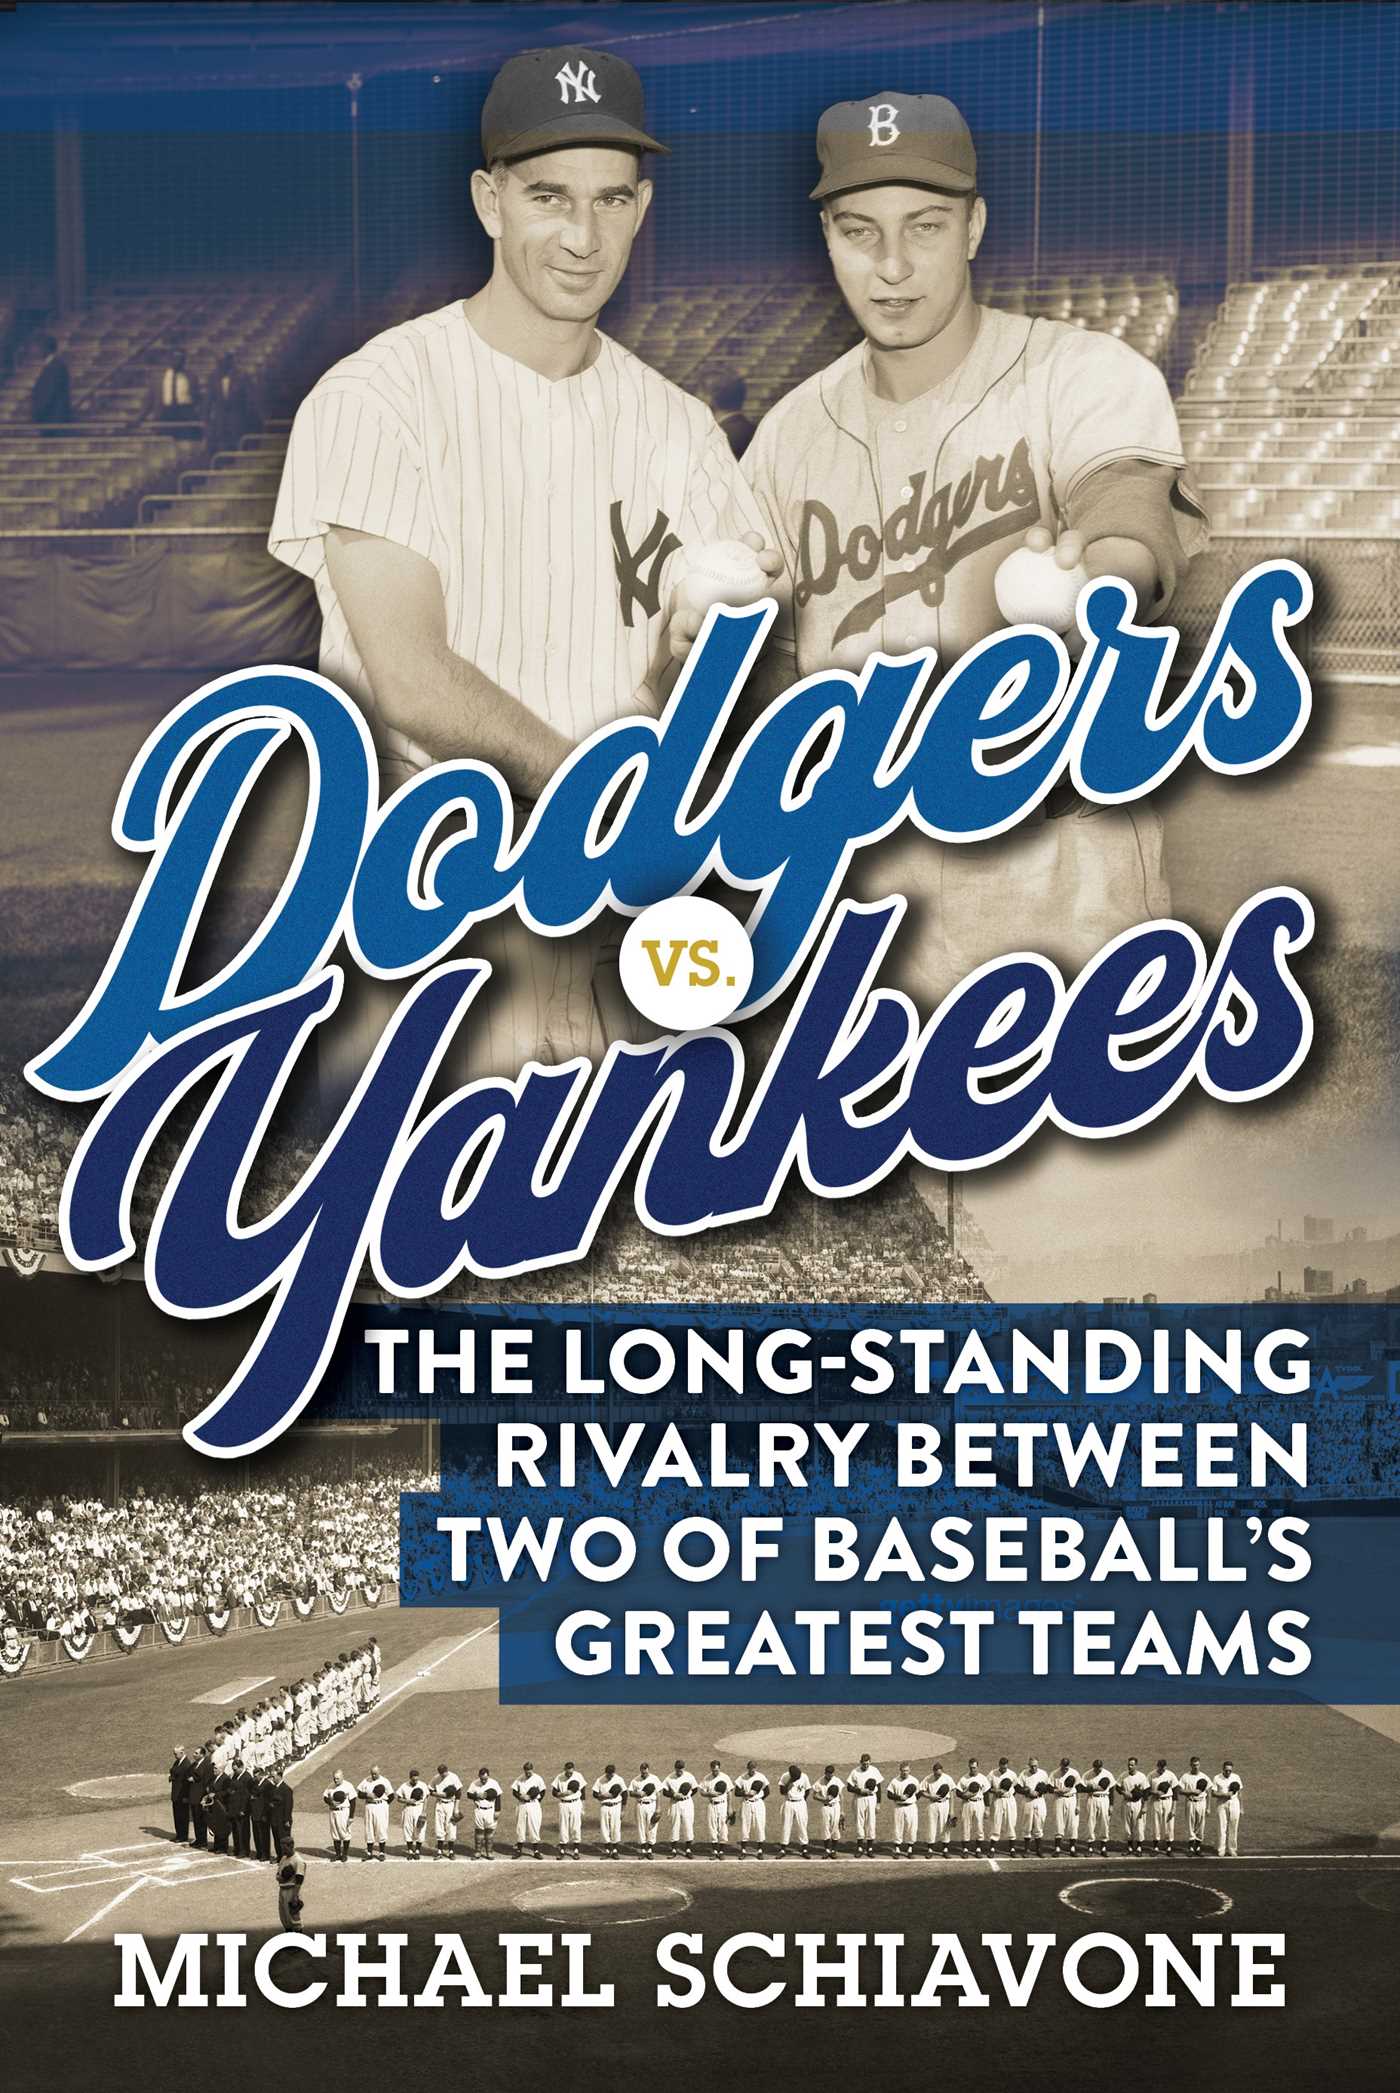 Read Online Dodgers vs. Yankees: The Long-Standing Rivalry Between Two of Baseball's Greatest Teams - Michael Schiavone file in PDF